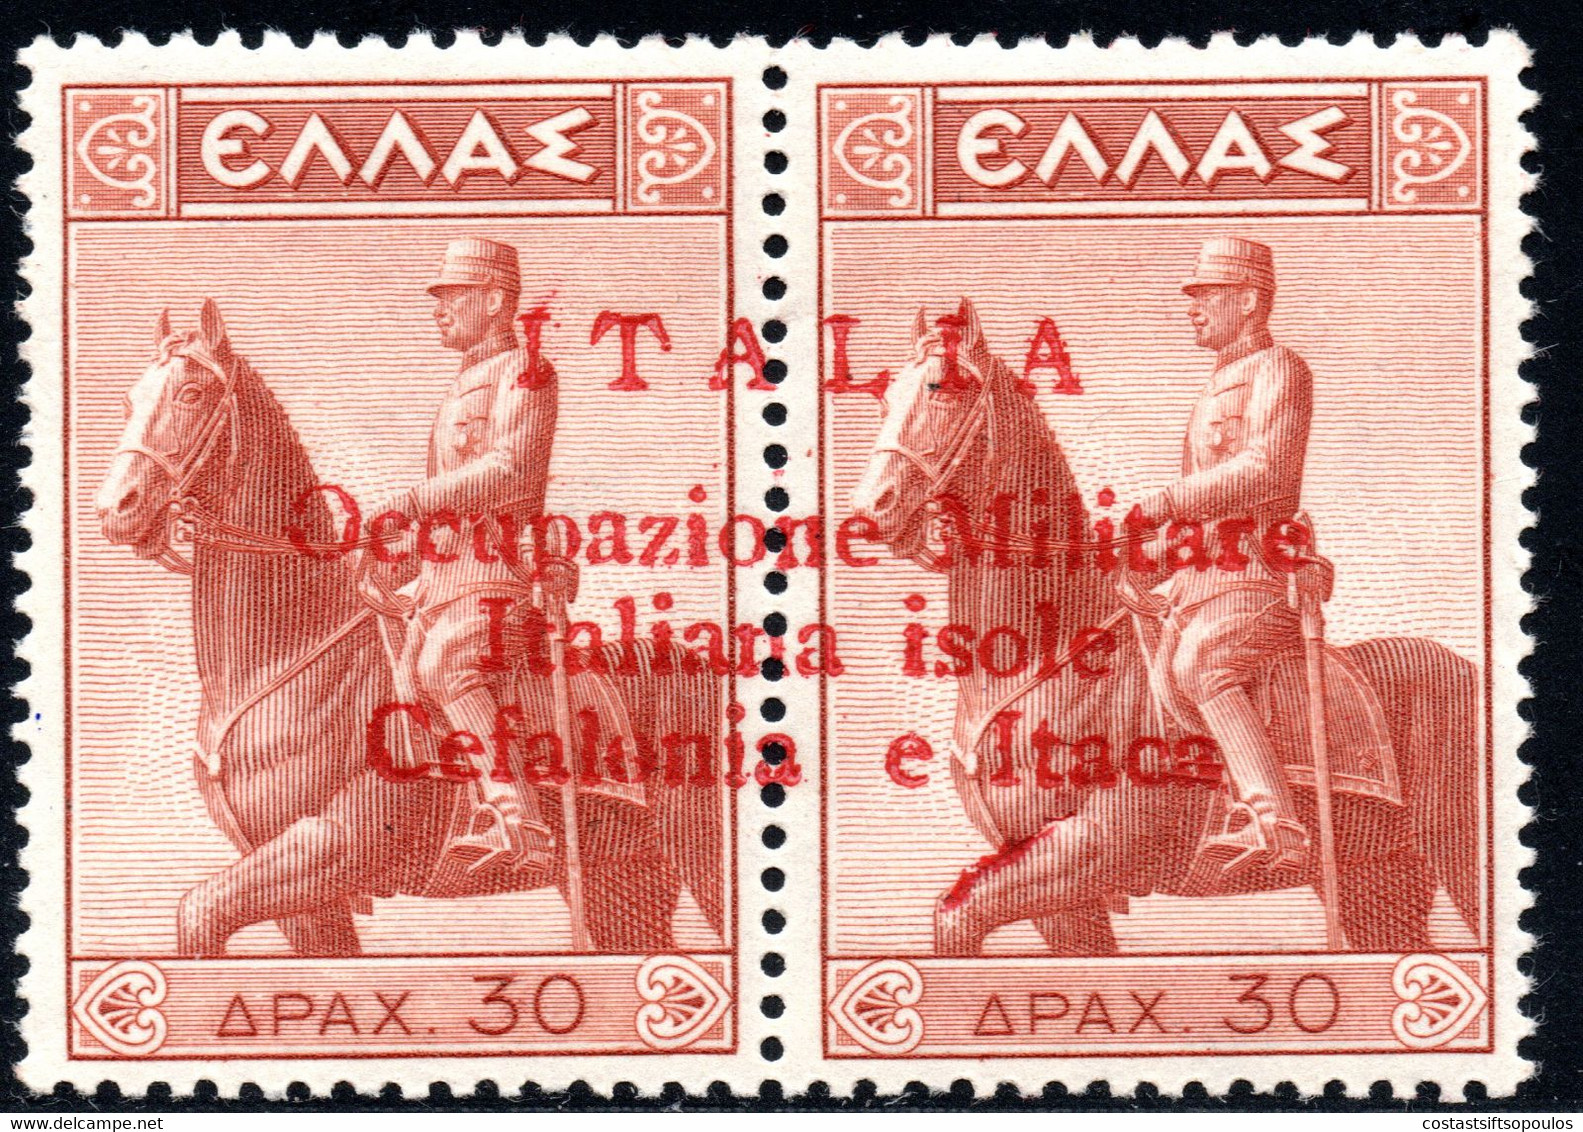 165.GREECE,ITALY,IONIAN,CEFALONIA,1941 30DR.RIDER,RED OVERPRINT???,MNH,POSSIBLY PRIVATE - Ionische Inseln